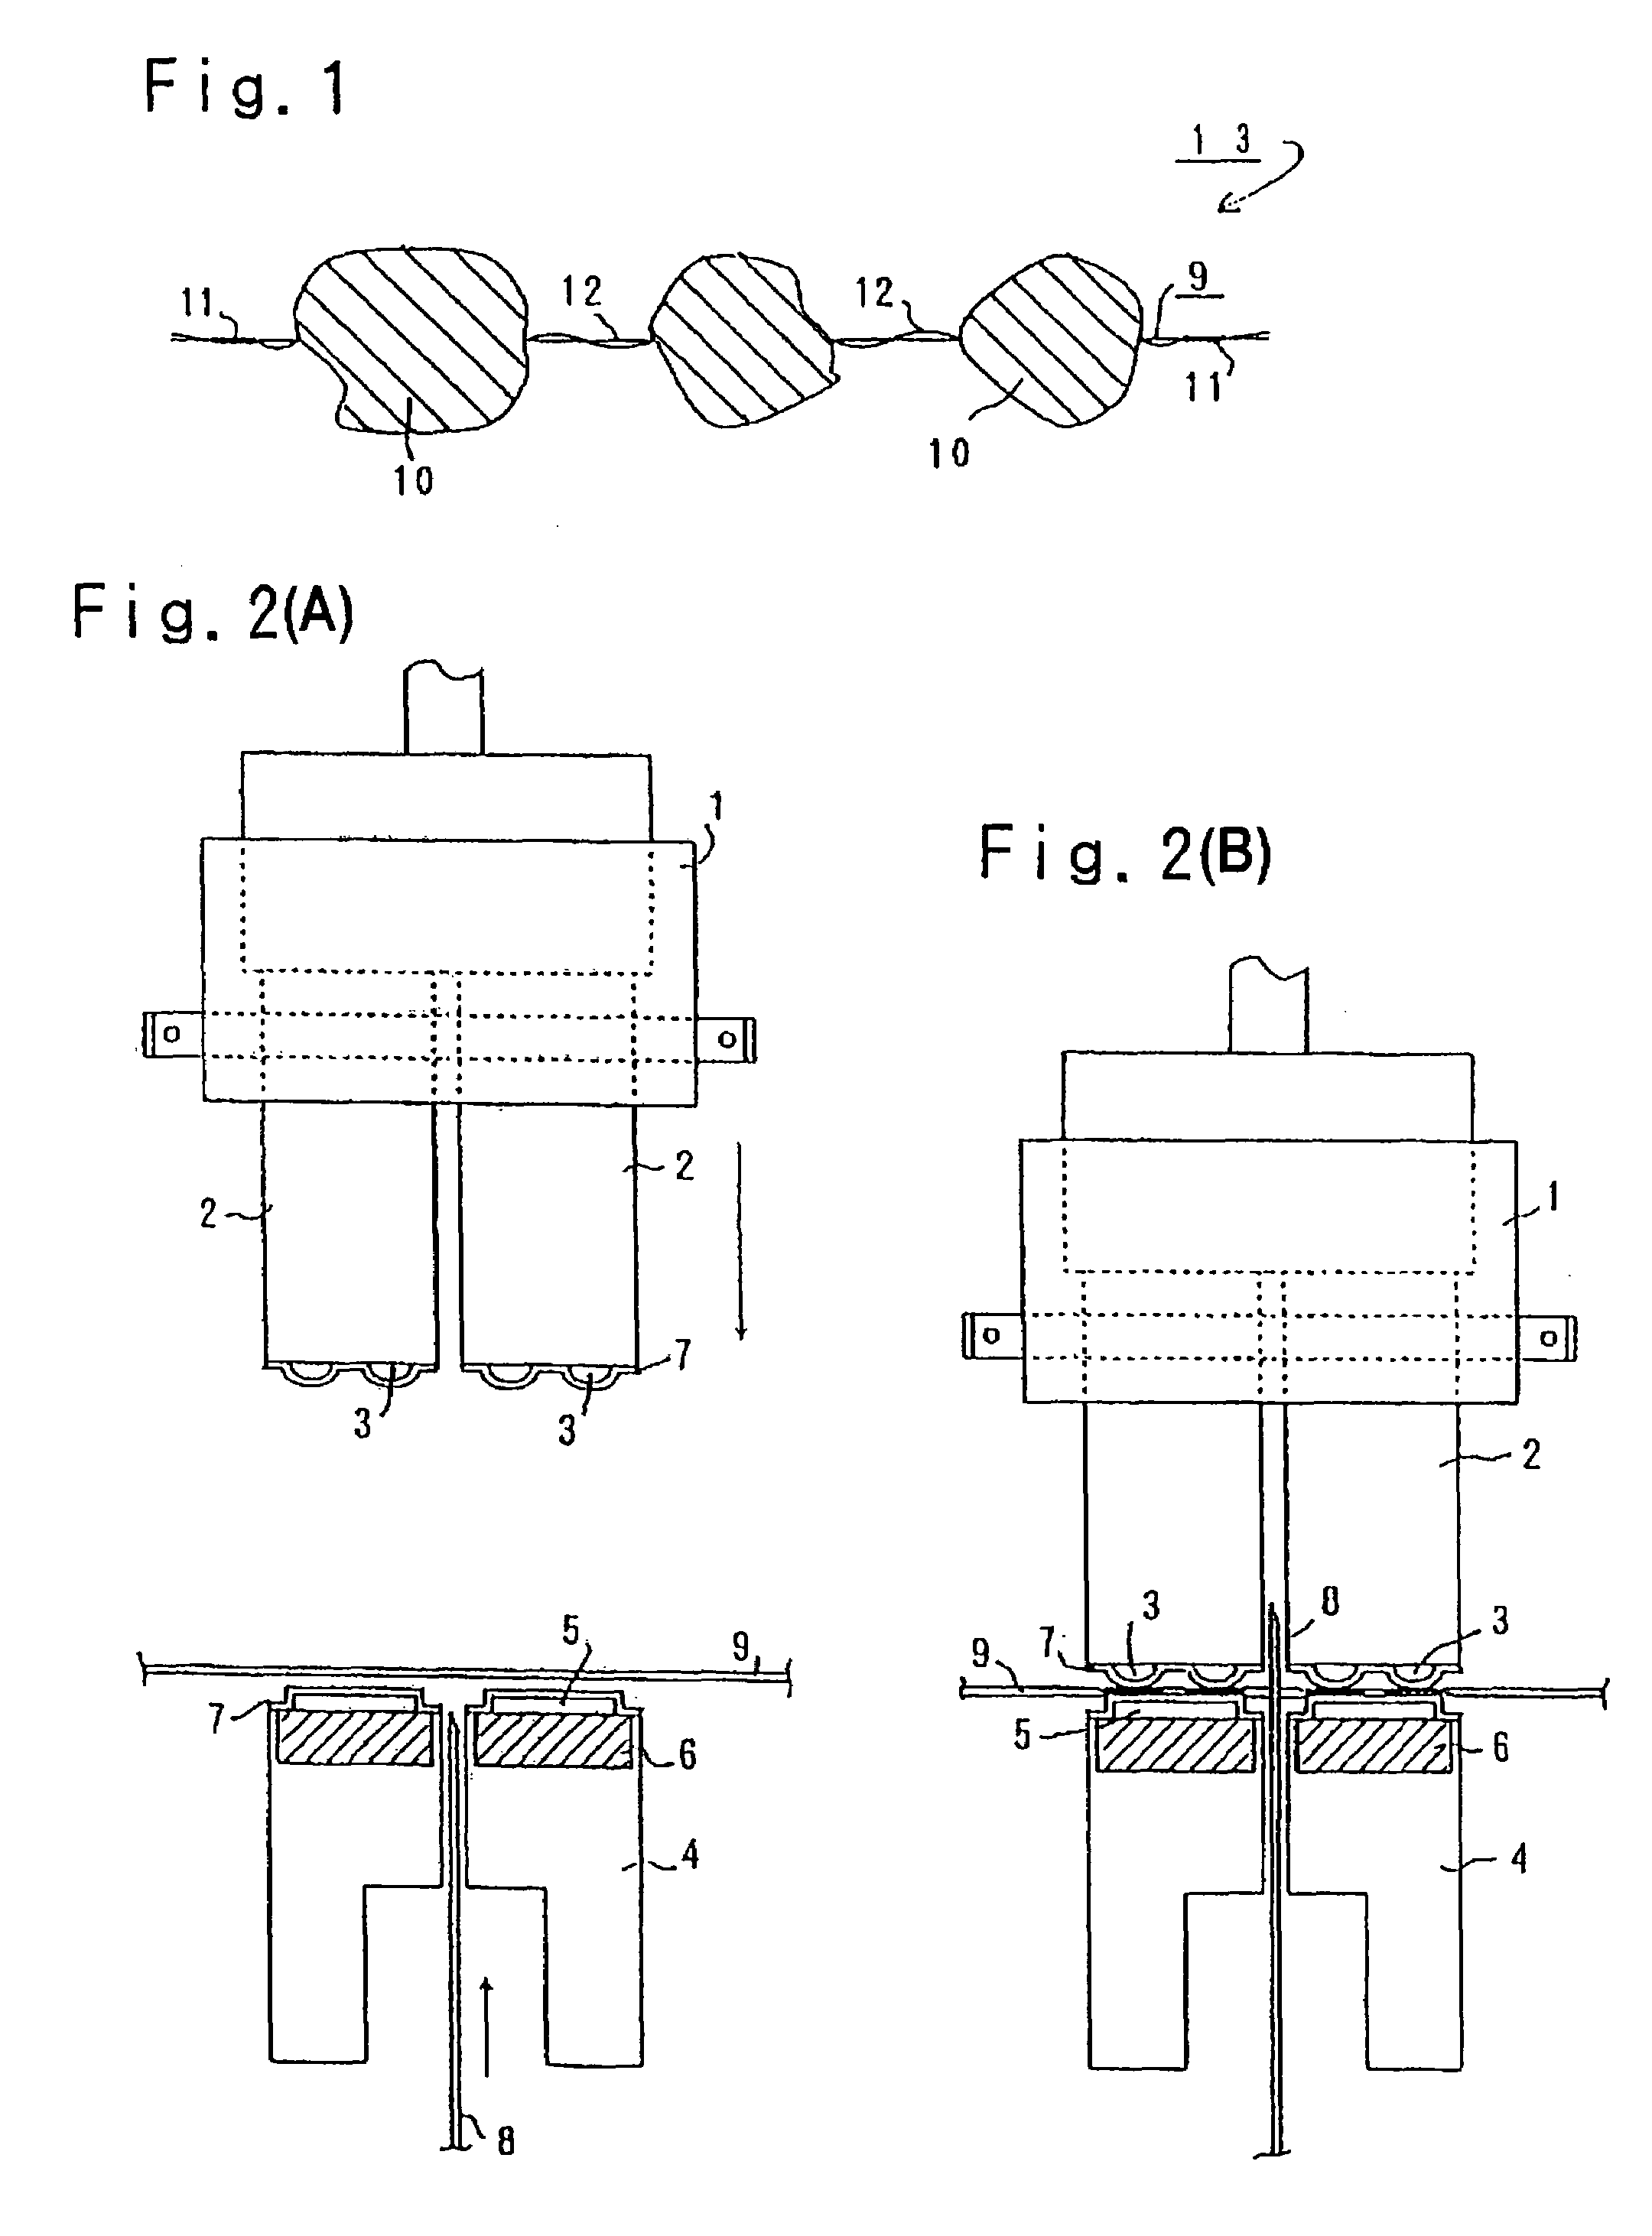 Method for high-speed vacuum unitary packaging of portion-cut meats